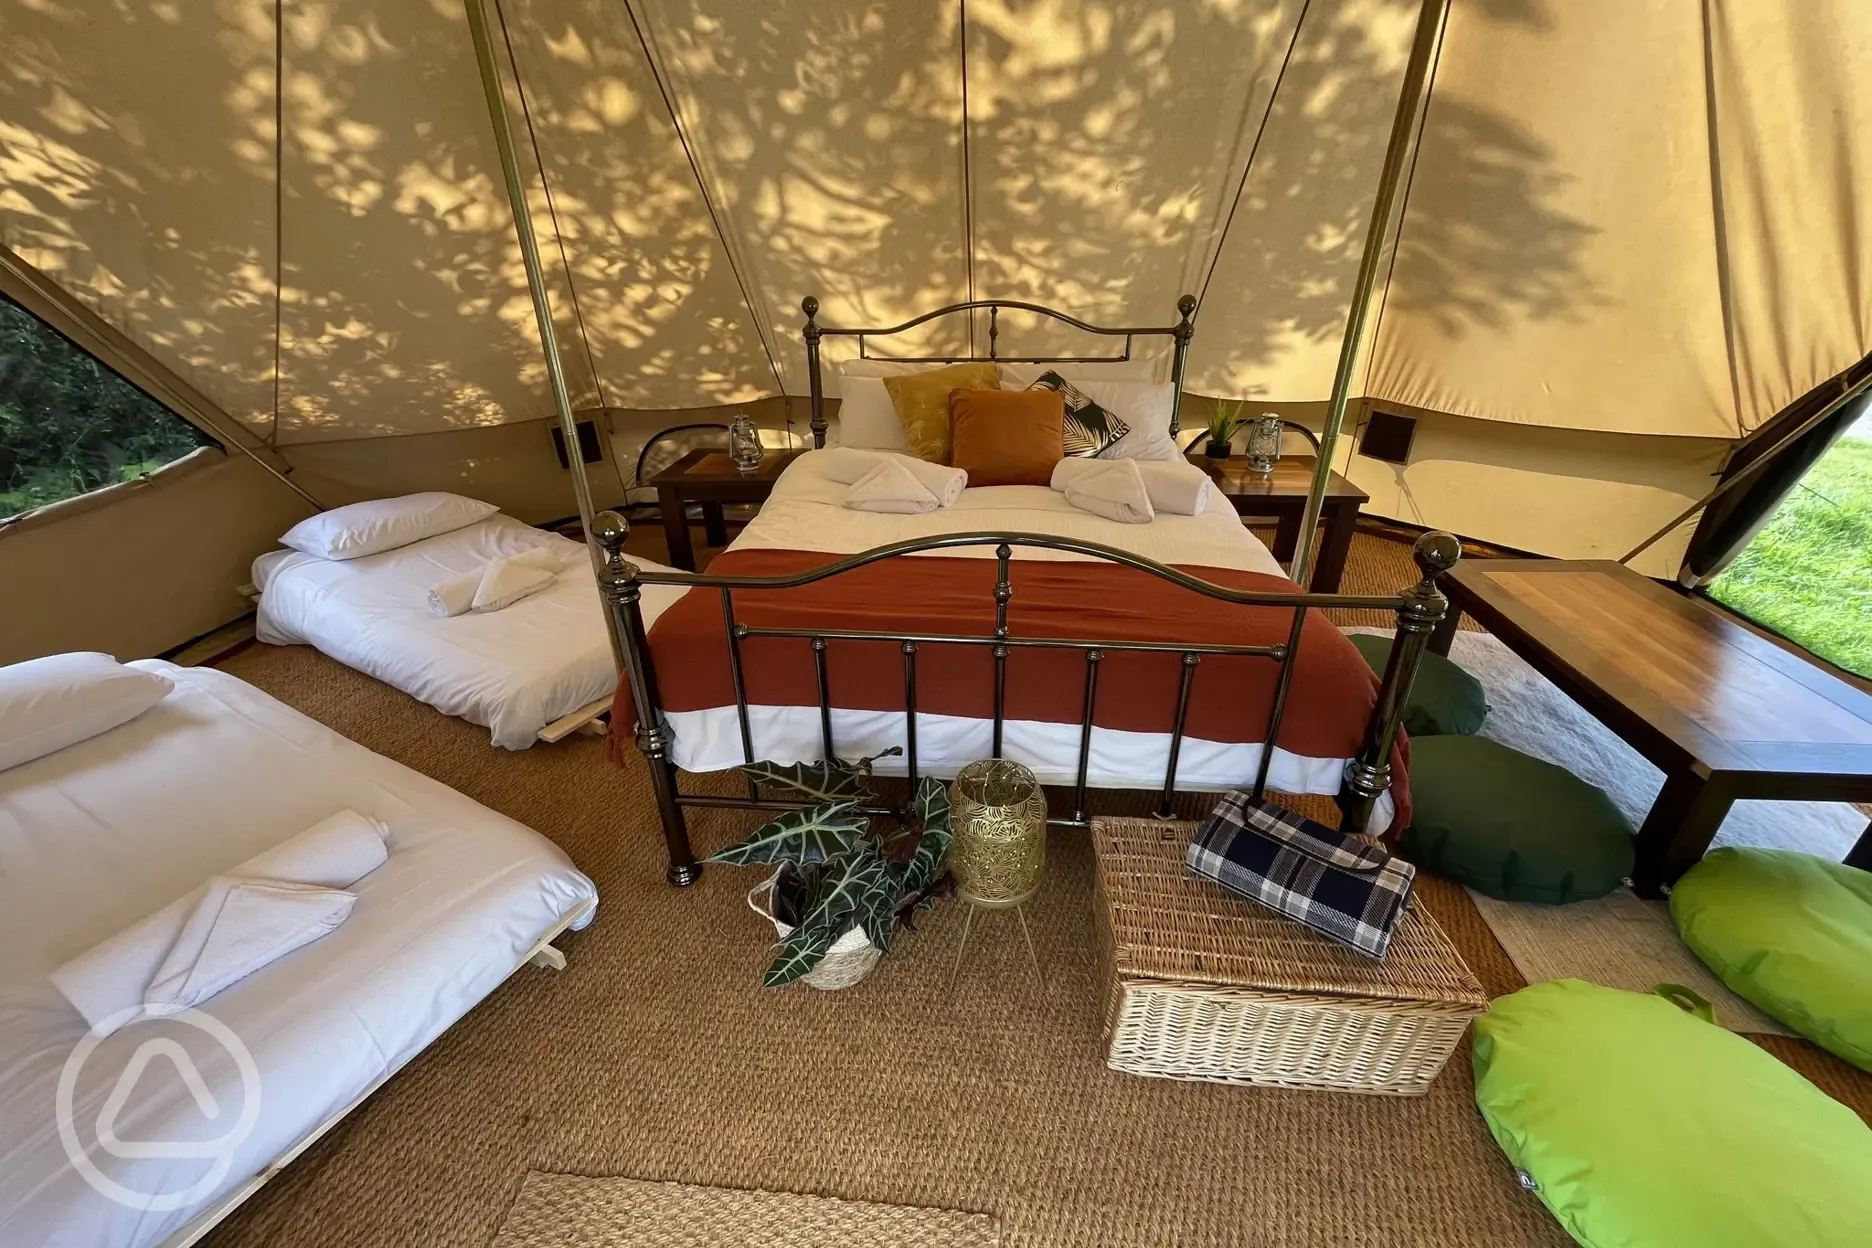 Fully furnished Emperor bell tent interior